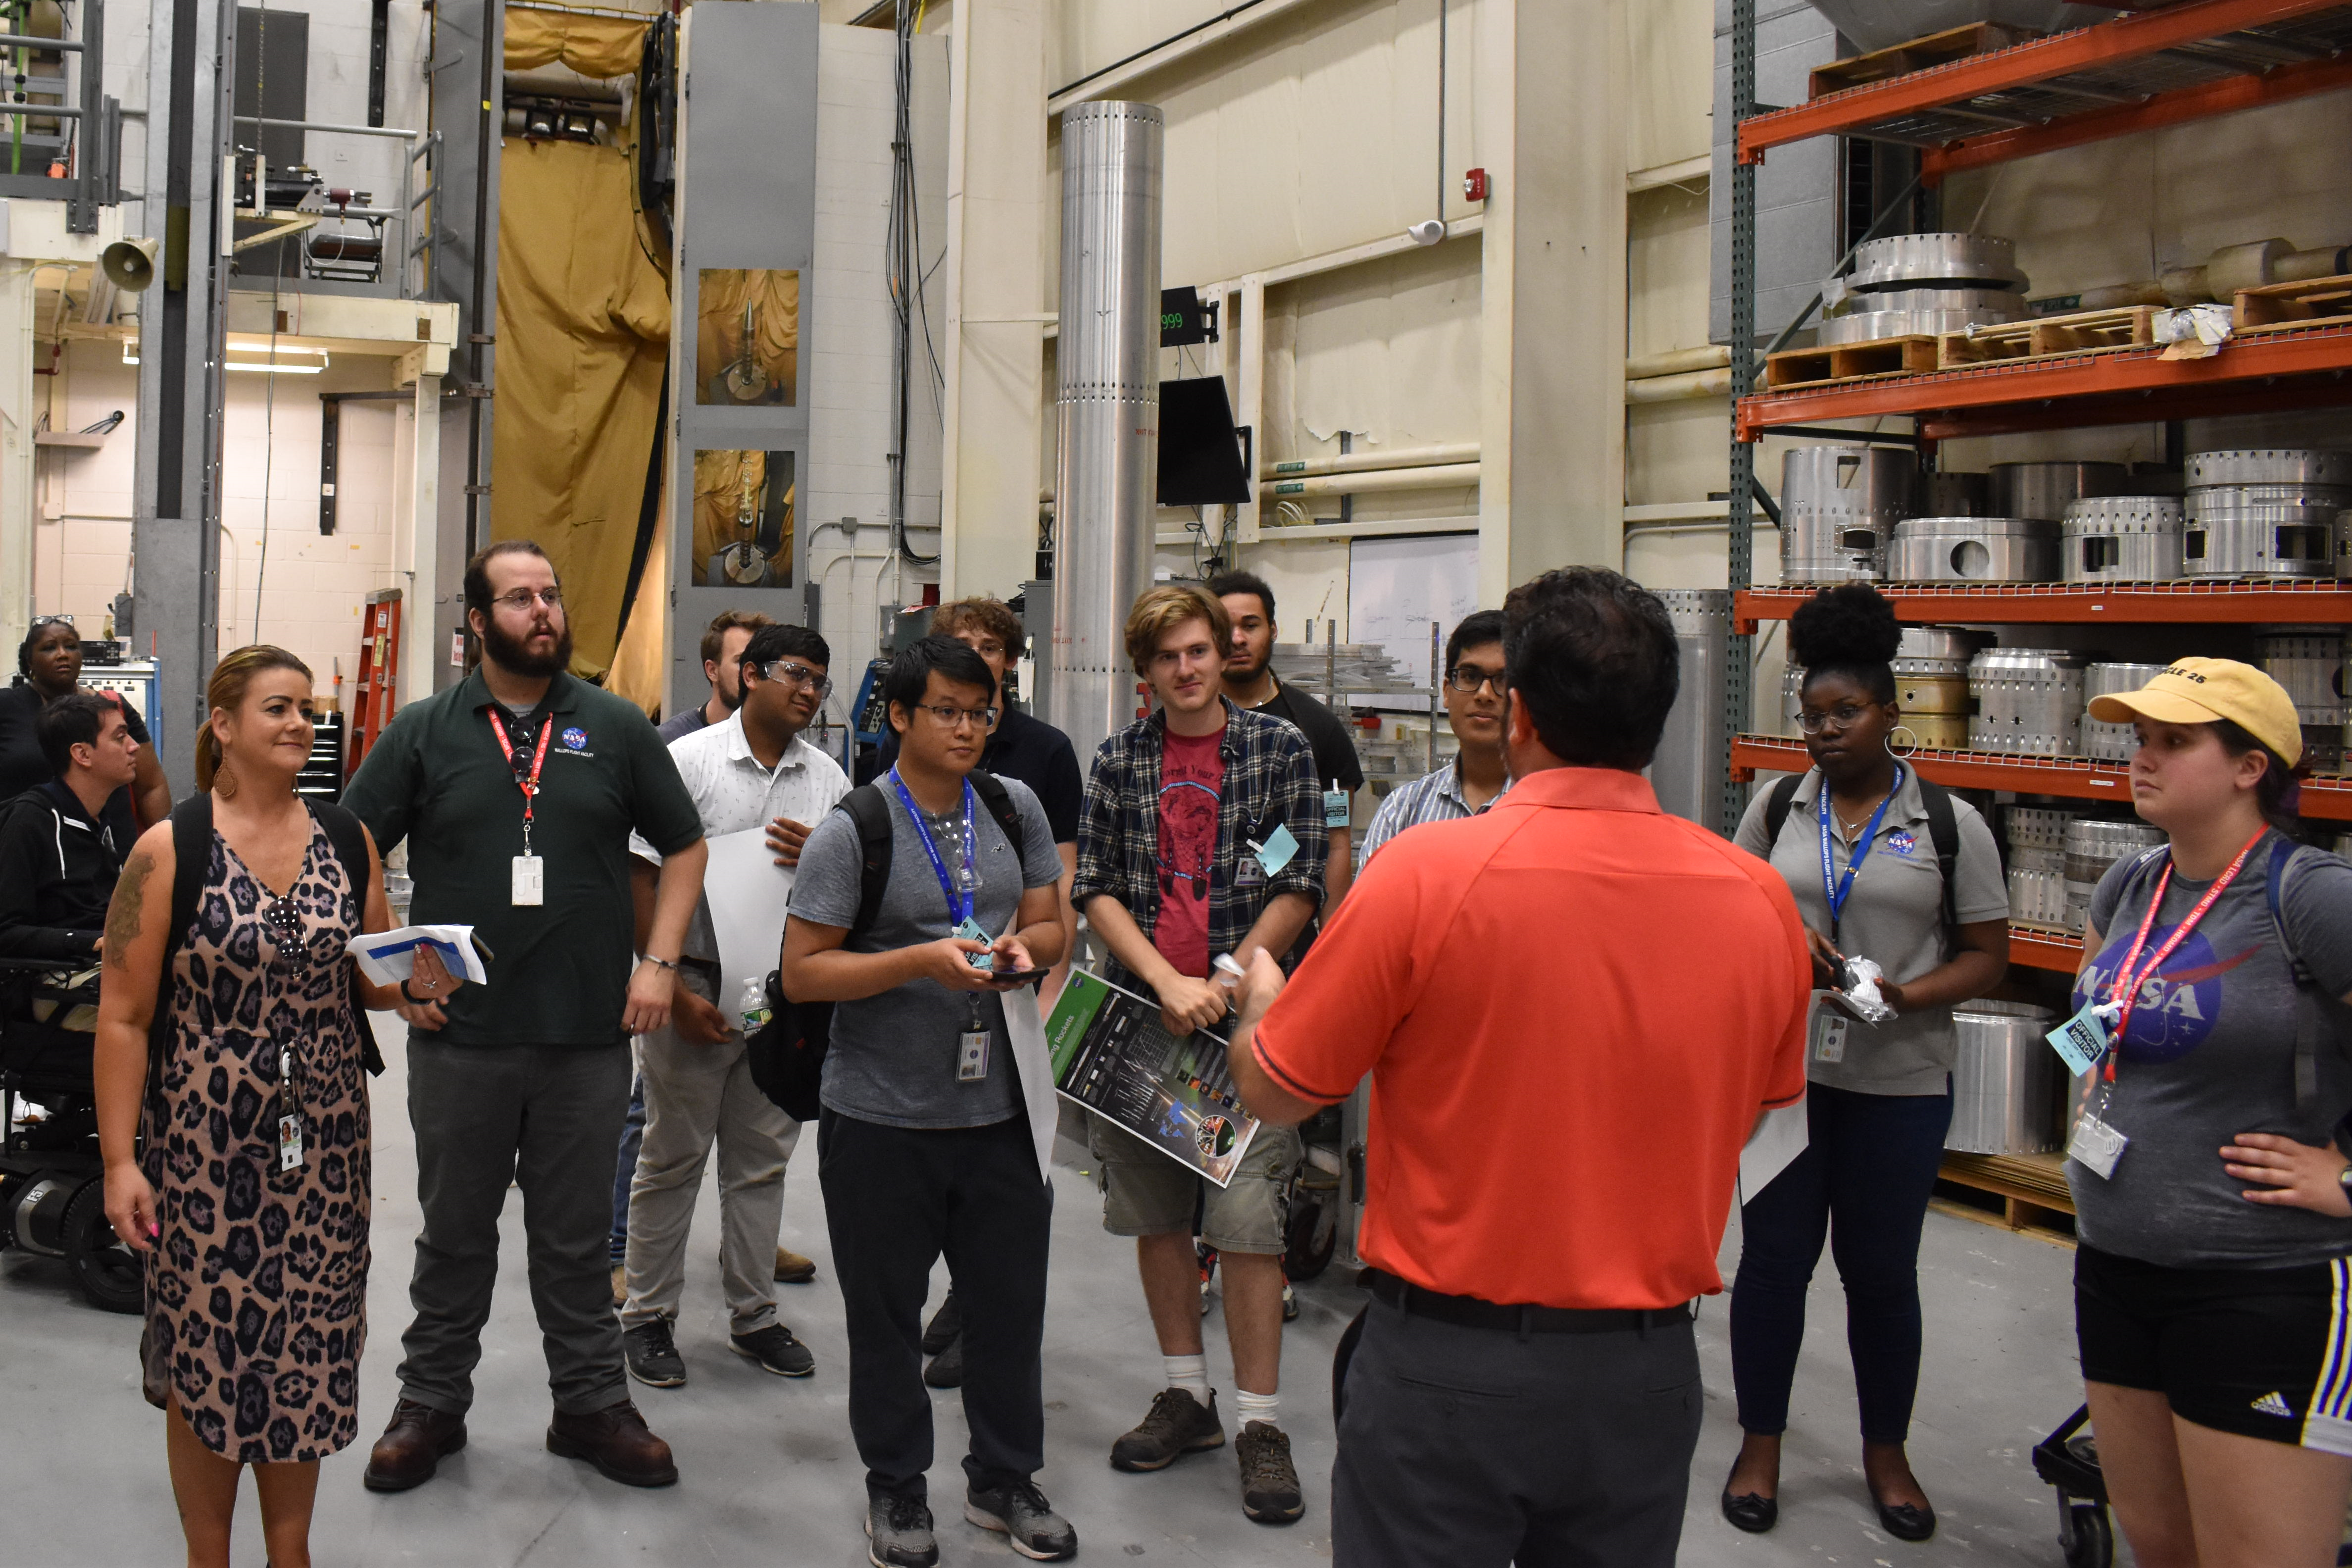 Medium wide perspective of a warehouse area. In the center foreground, a man wearing an orange dress shirt speaks to a group of students.